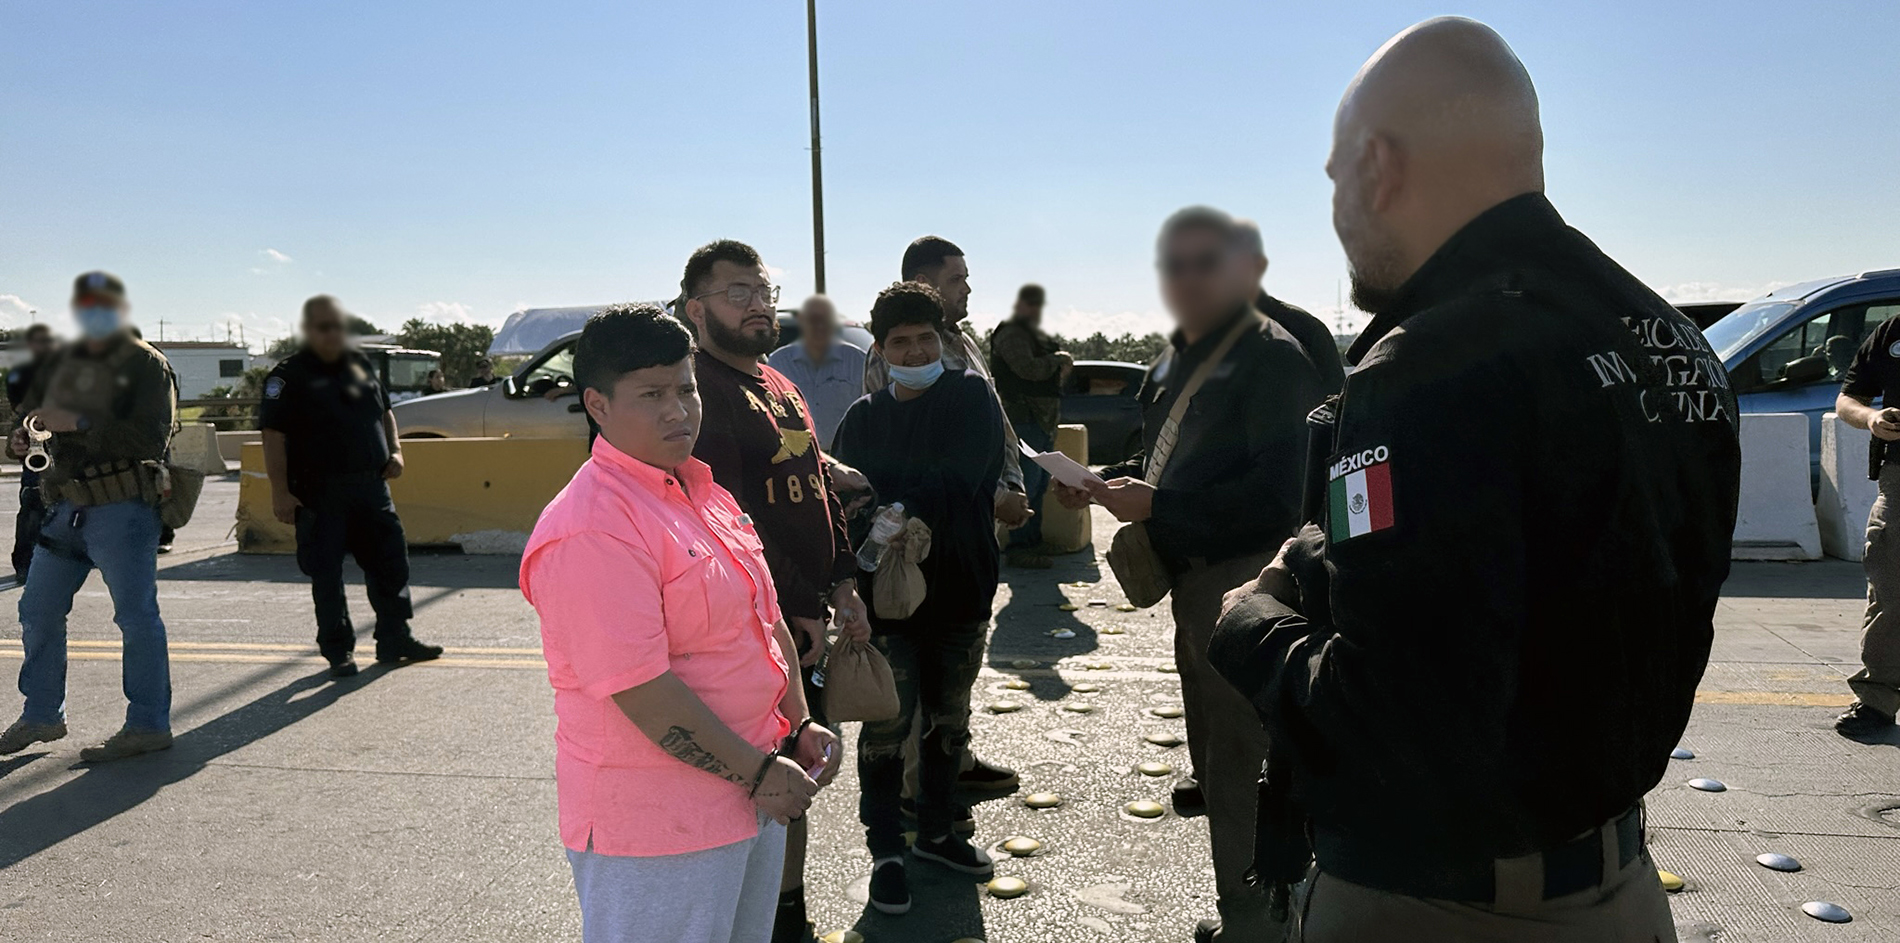 ERO Houston deportation officers transfer custody of four foreign fugitives including one individual wanted for aggravated rape of a minor to Mexican authorities on the Juarez-Lincoln Bridge in Laredo, Texas, May 25.